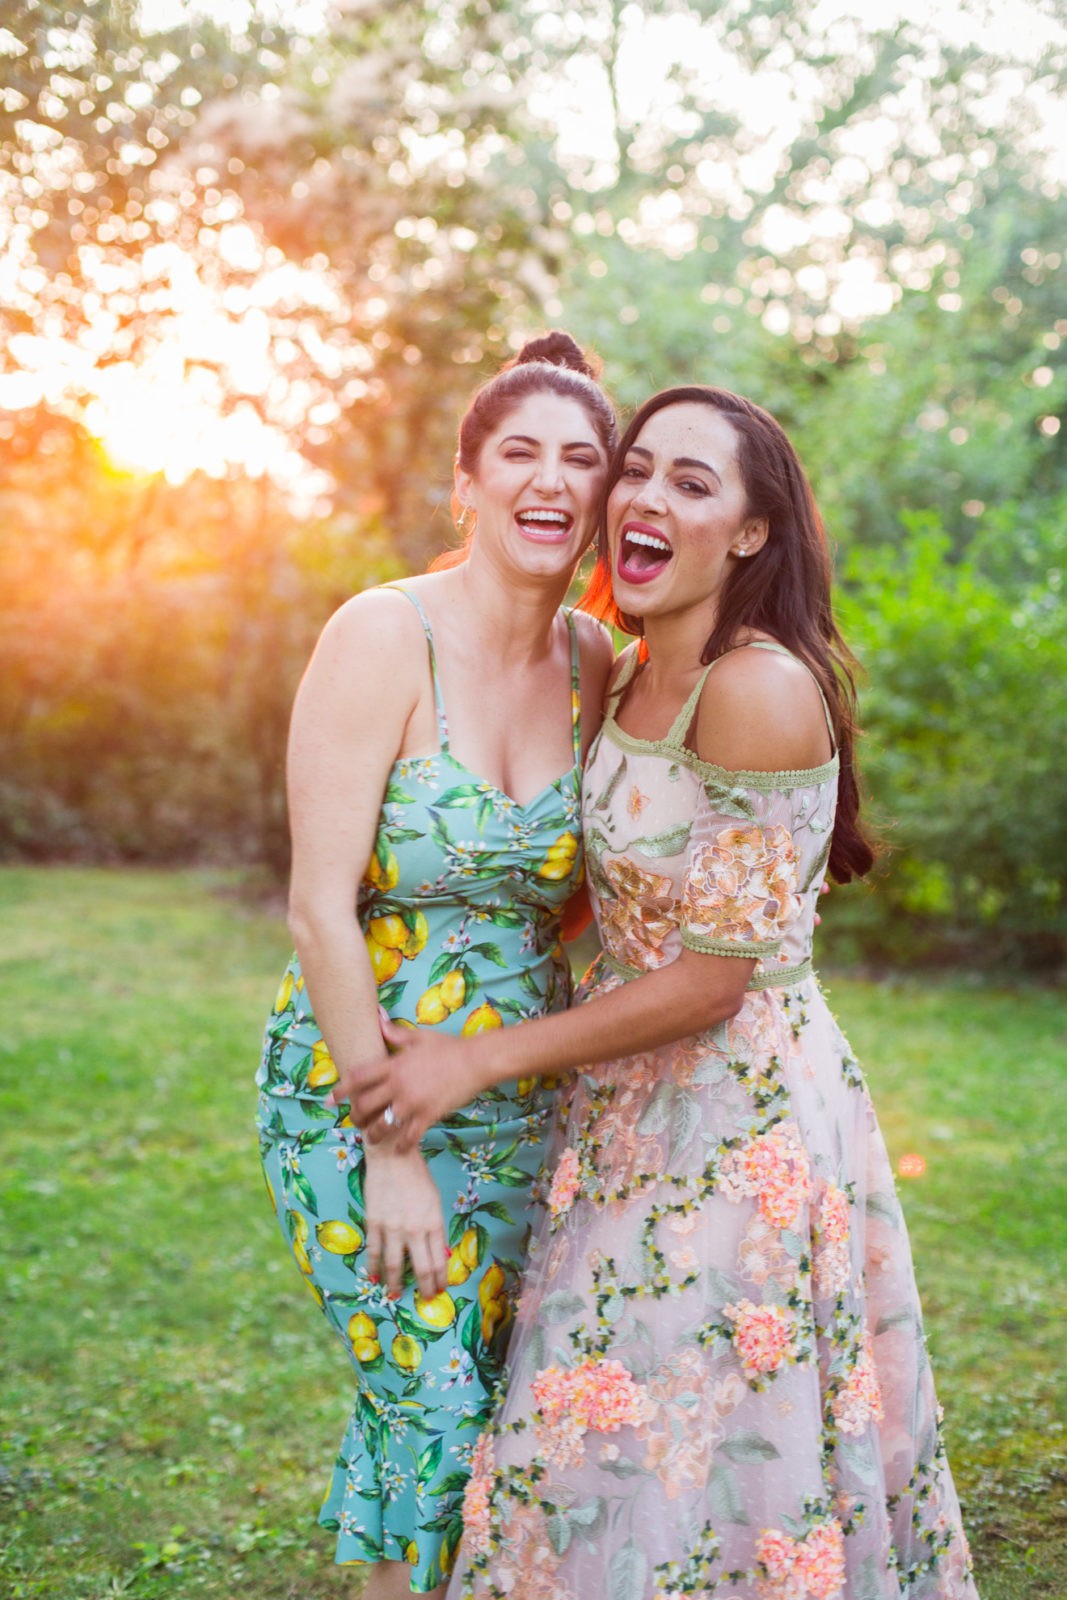 Summer Picnic in Italy by Lifestyle Blogger Laura Lily, I Am Fashion Laine, Elizabeth Keene | An Italian Picnic by popular US fashion blogger, Laura Lilly: image of 2 women in garden dresses standing together with their arms around each other at La Foce Property in Tuscany, Italy.